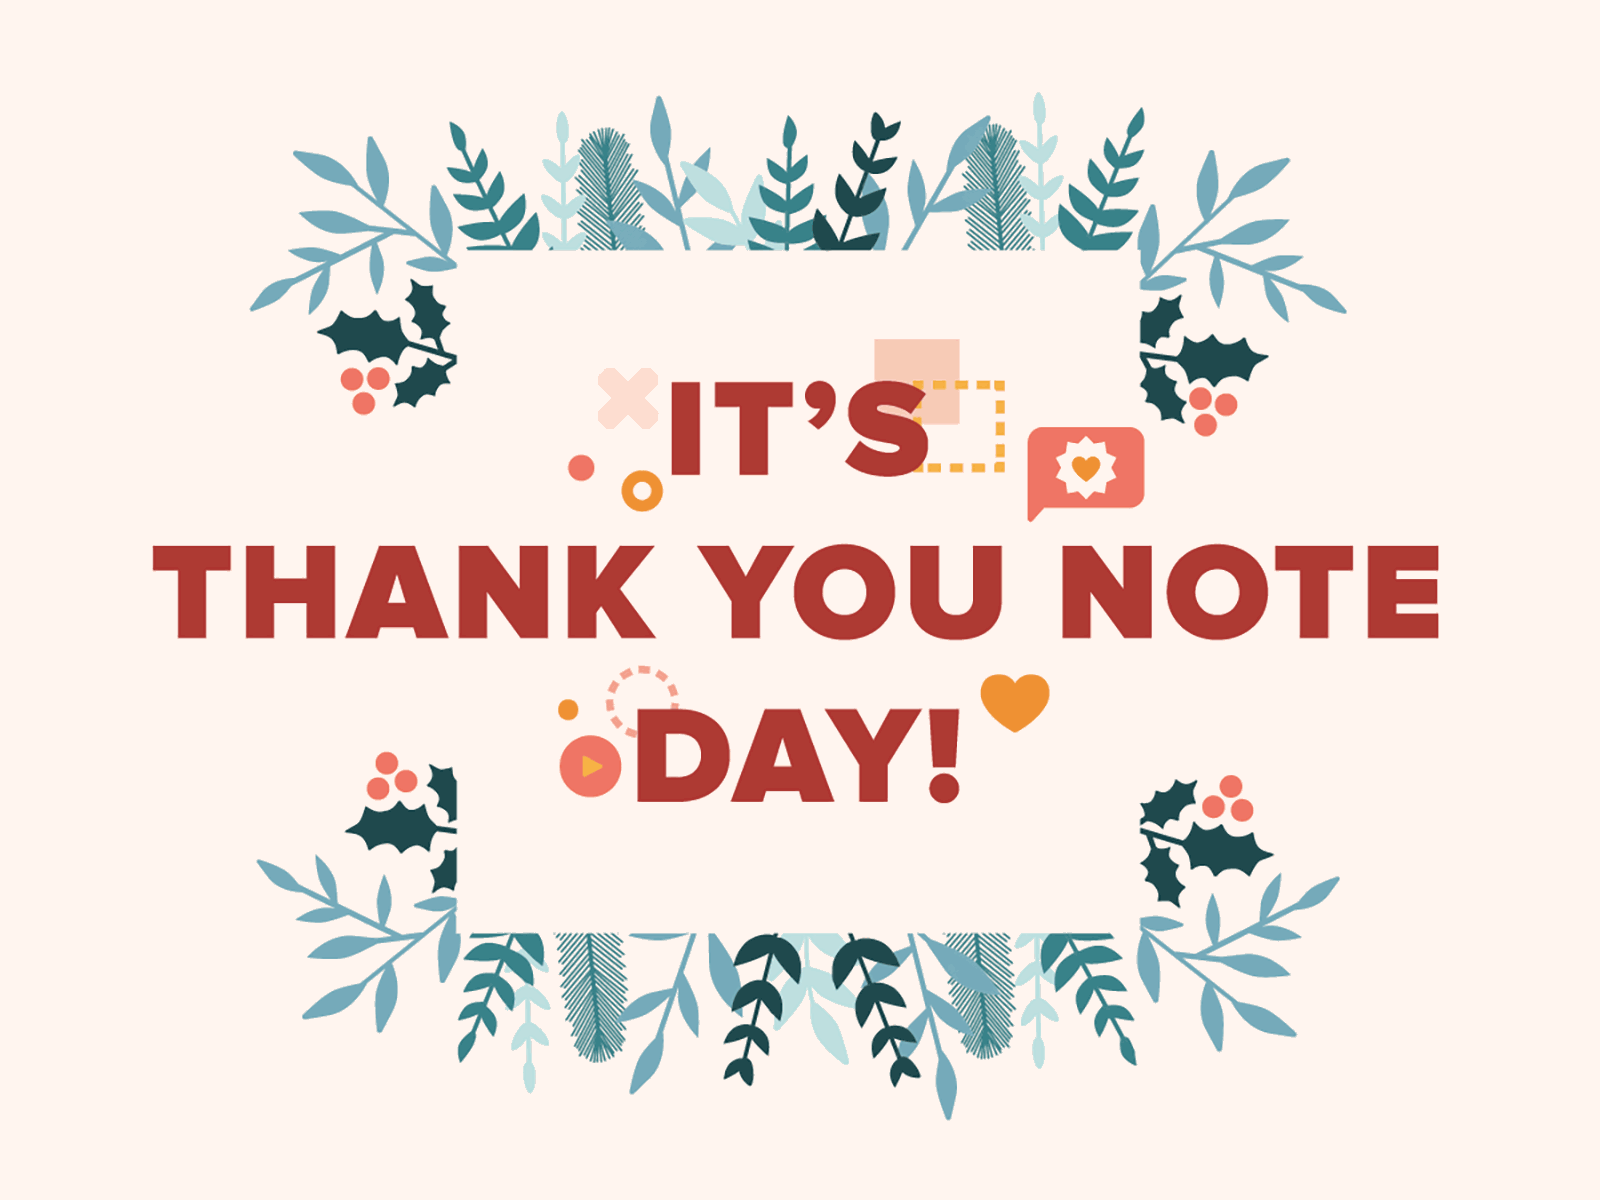 Thank You Note Day- Email Header animation branding illustraton vector